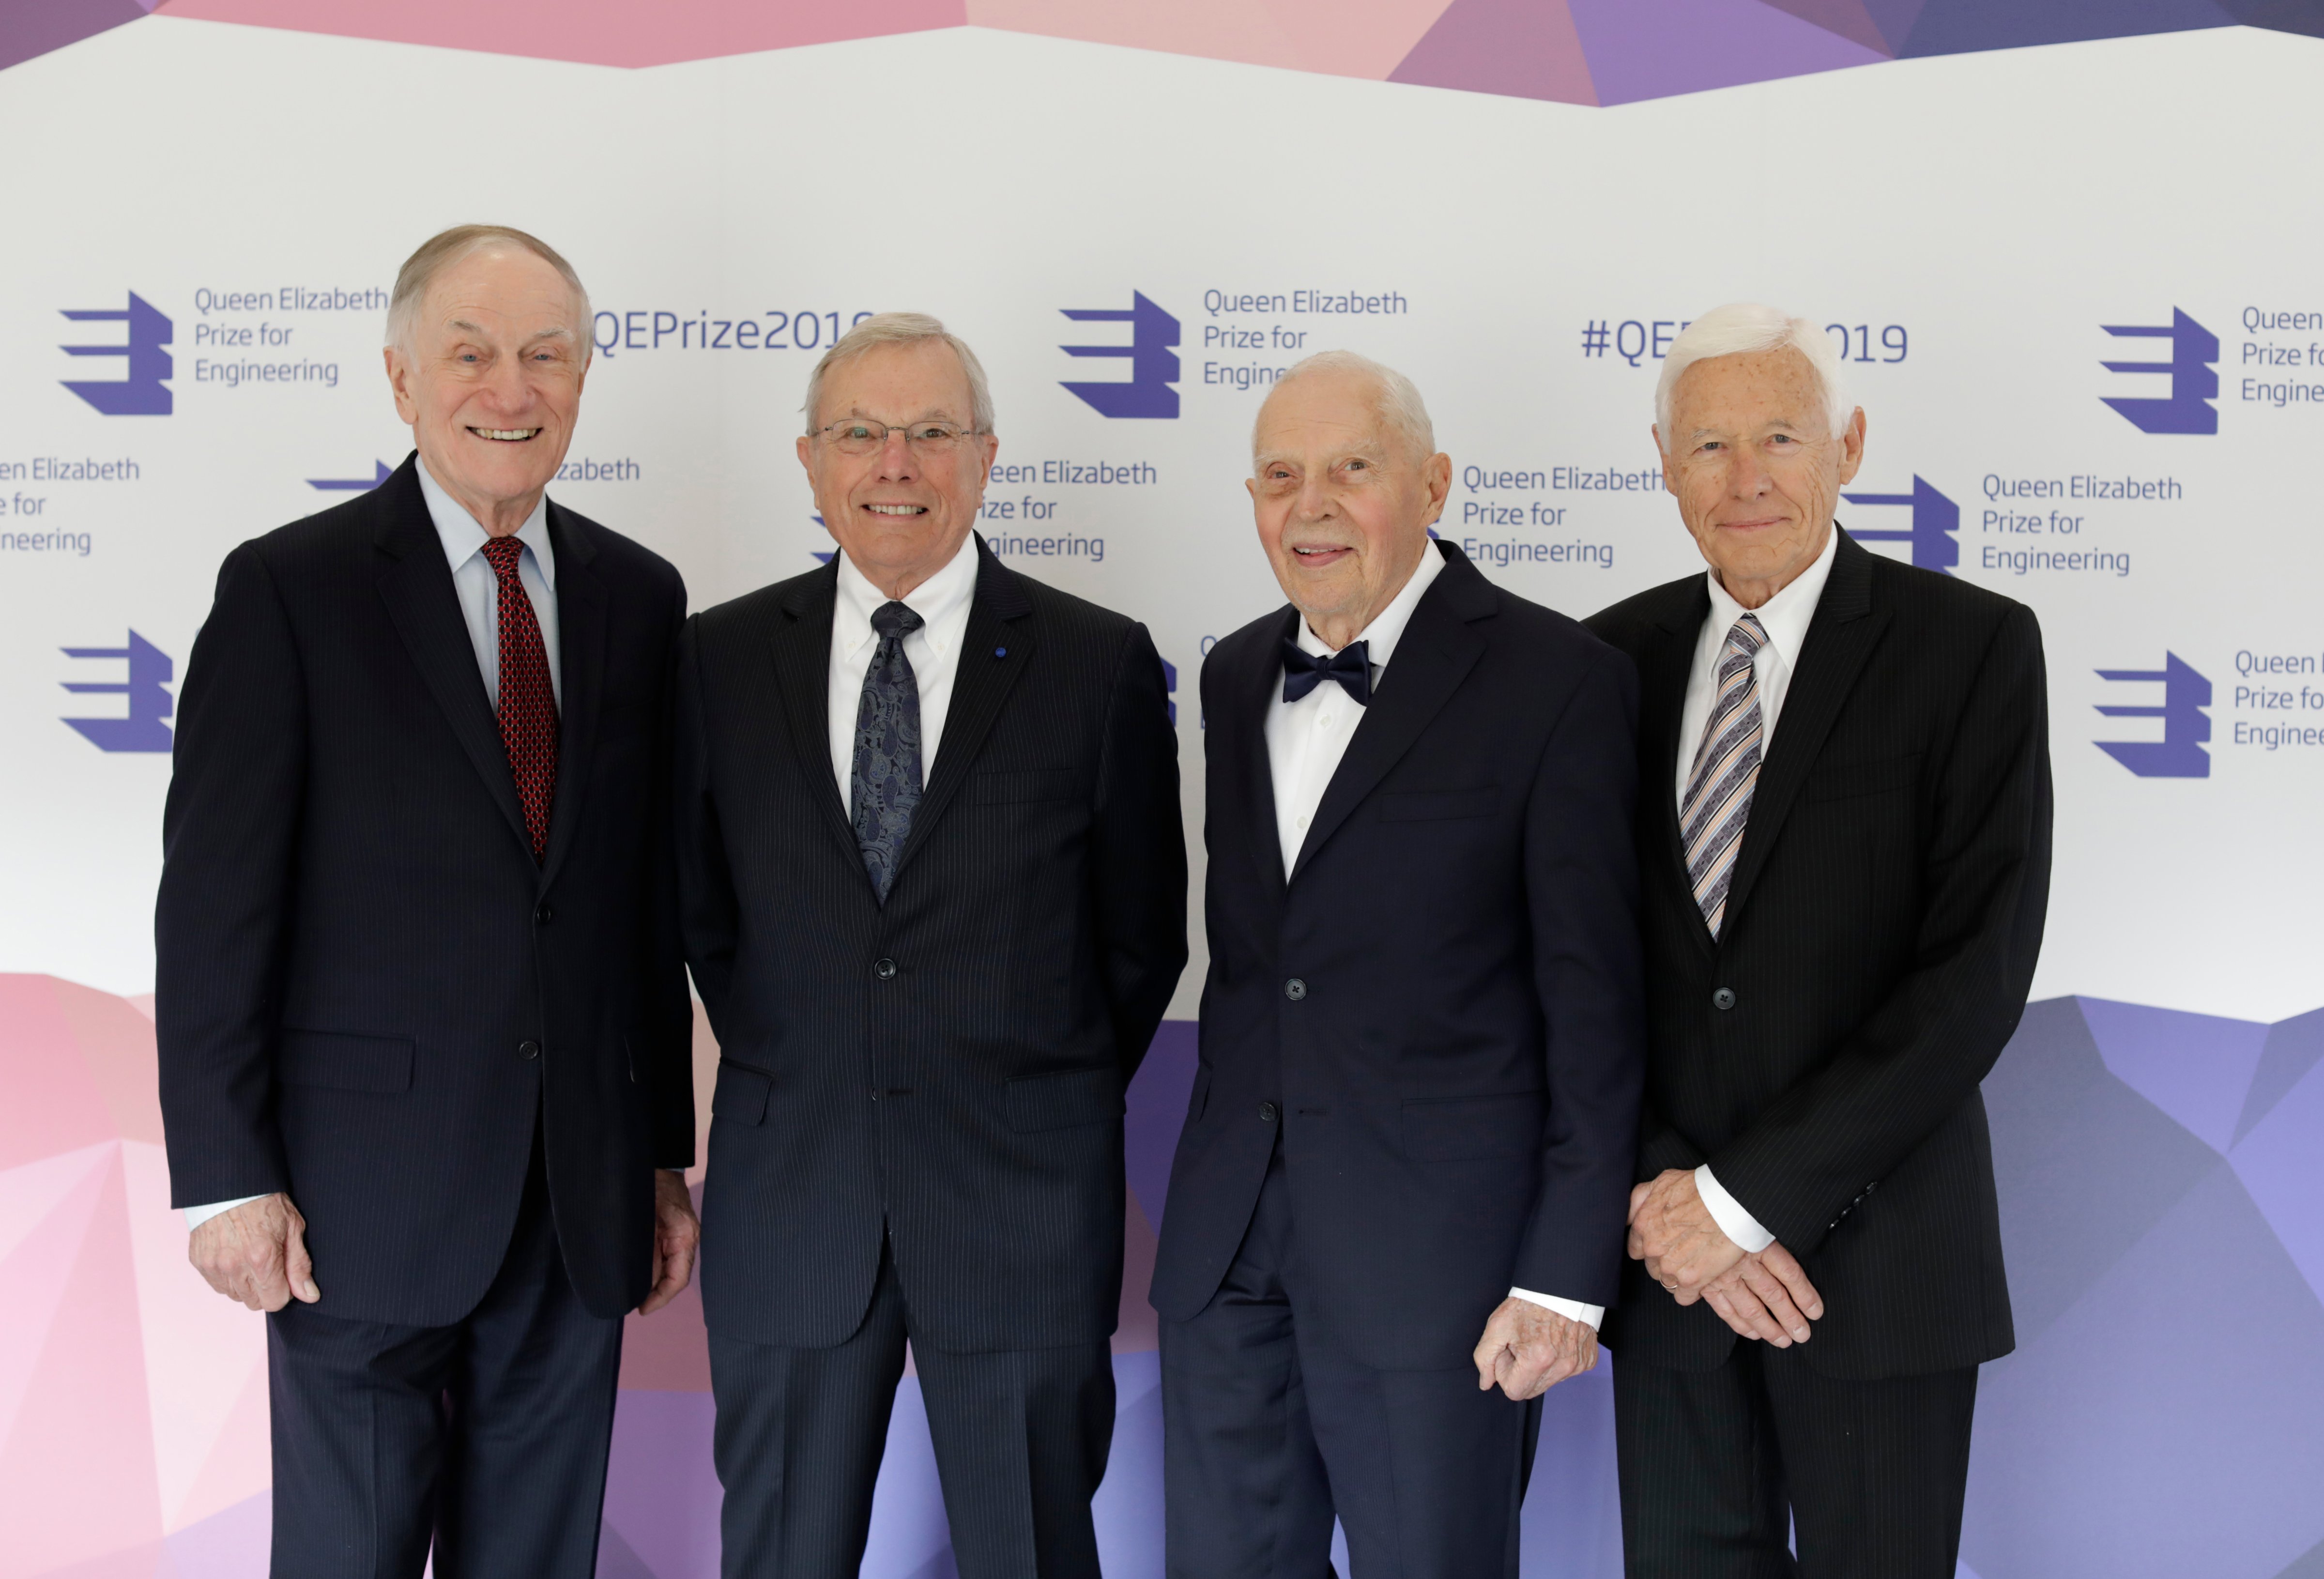 FEB 12: The four winners of the 2019 Queen Elizabeth Prize for Engineering, for innovations that brought GPS to the world. From left: Richard Schwartz, Bradford Parkinson, James Spilker, Hugo Freuhauf (Layton Thompson/Edelman)